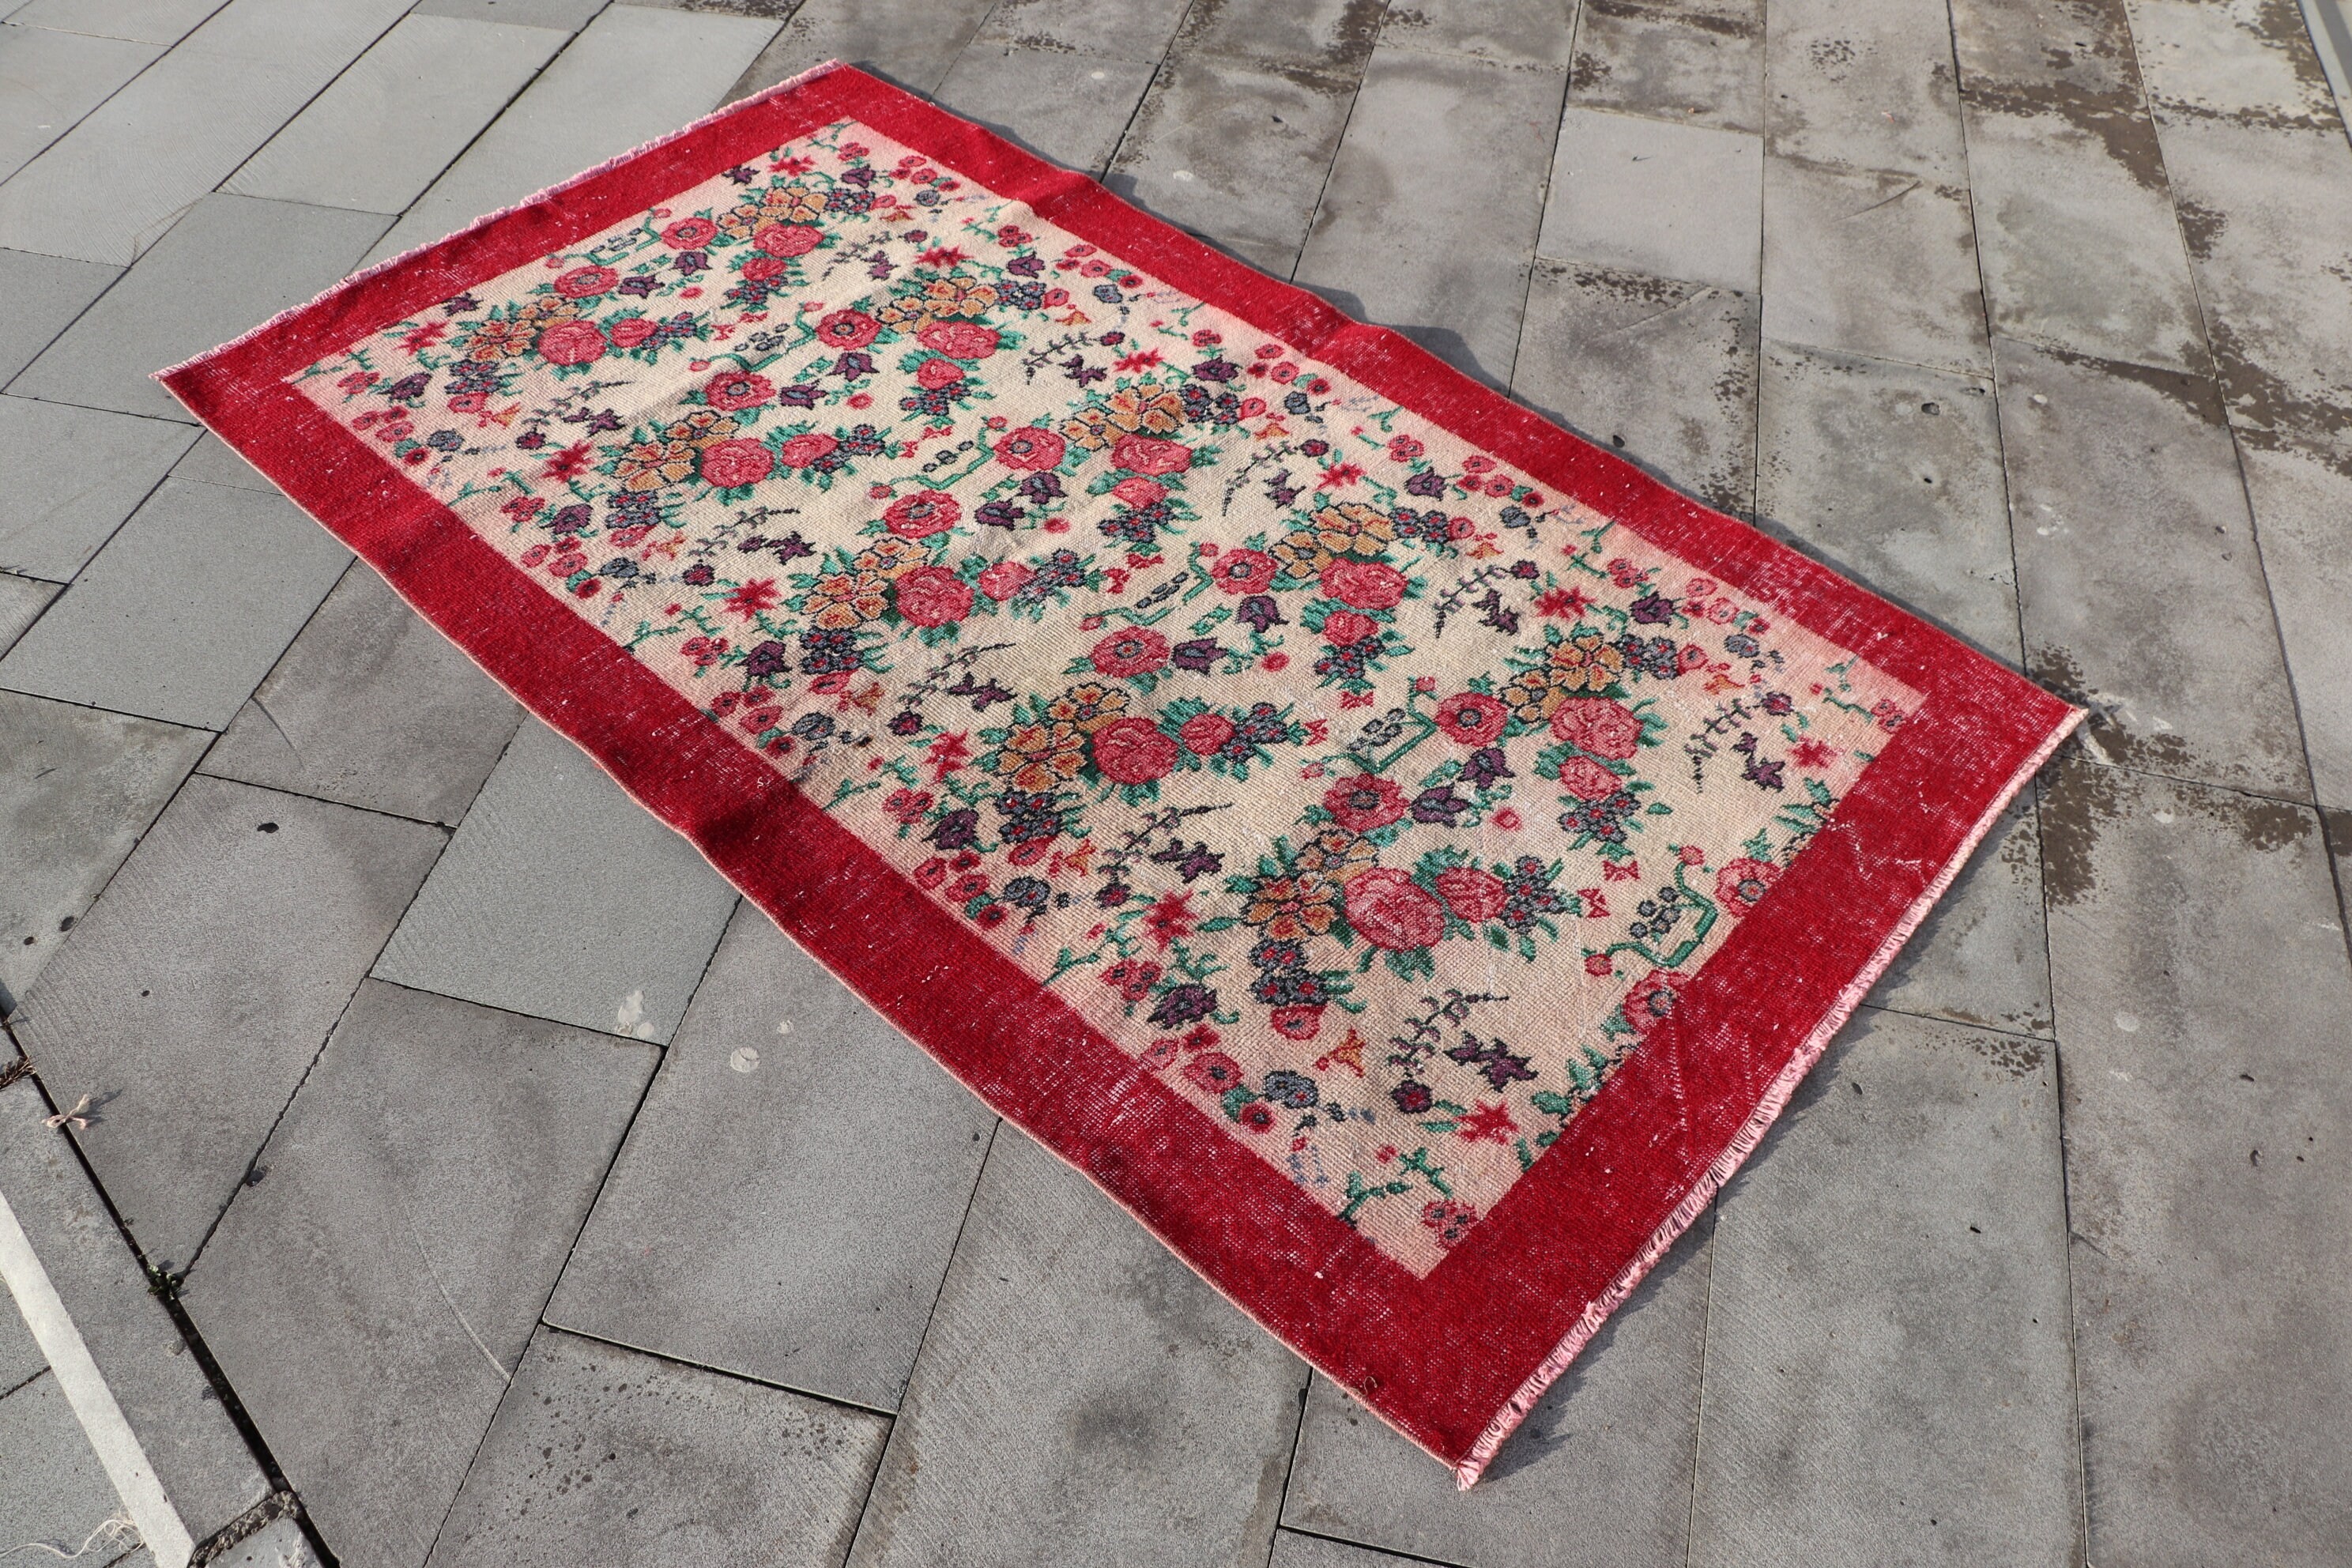 Turkish Rug, 3.6x6.5 ft Accent Rugs, Oriental Rug, Vintage Rug, Kitchen Rug, Anatolian Rugs, Red Moroccan Rugs, Nursery Rugs, Muted Rugs